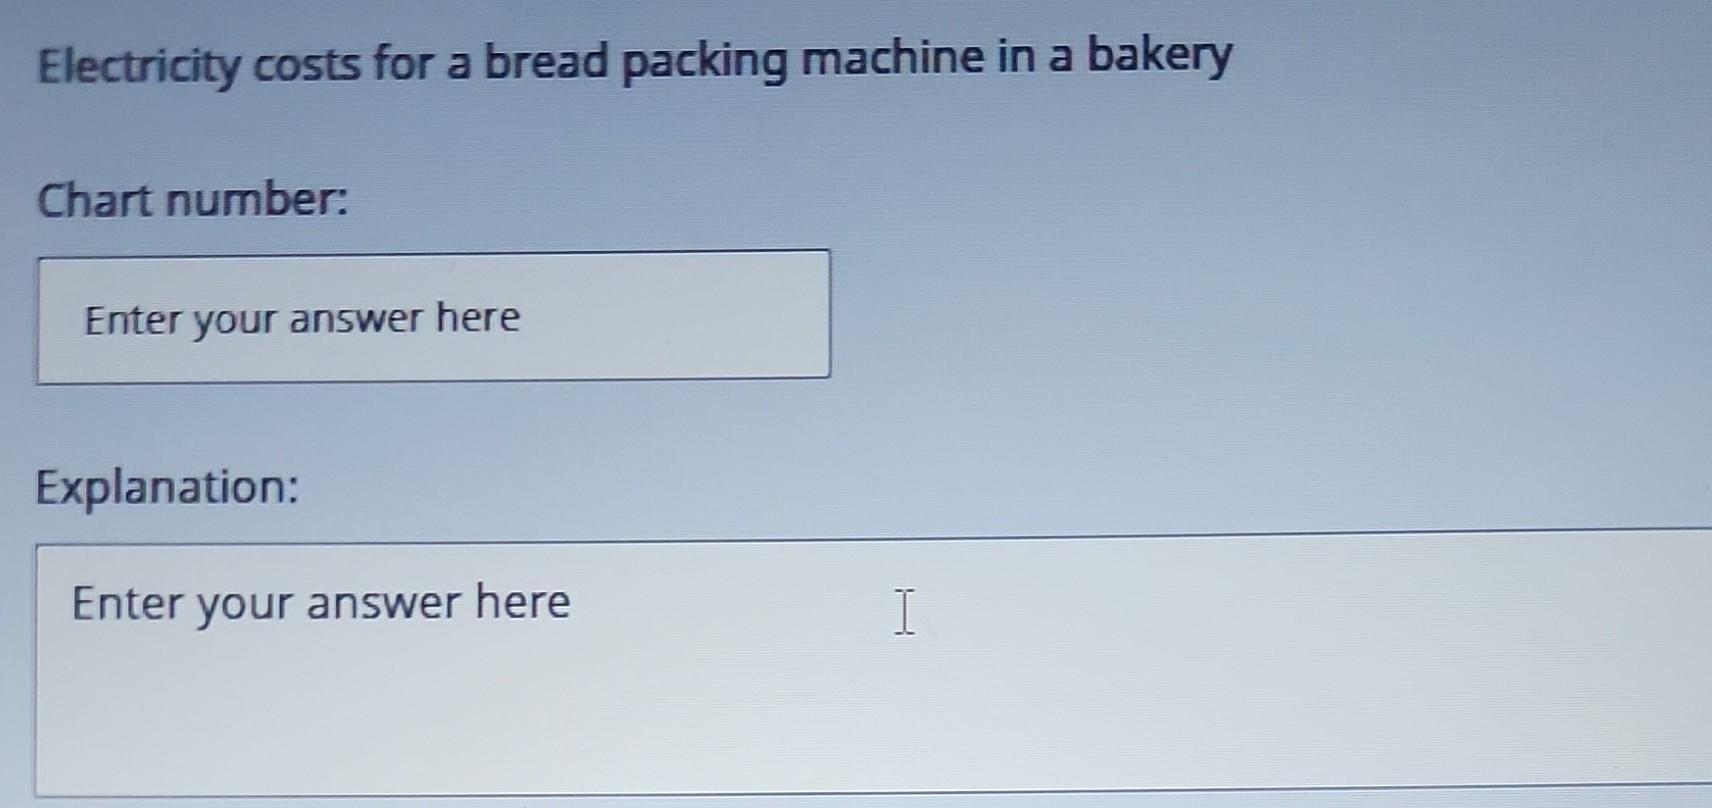 Electricity costs for a bread packing machine in a bakery